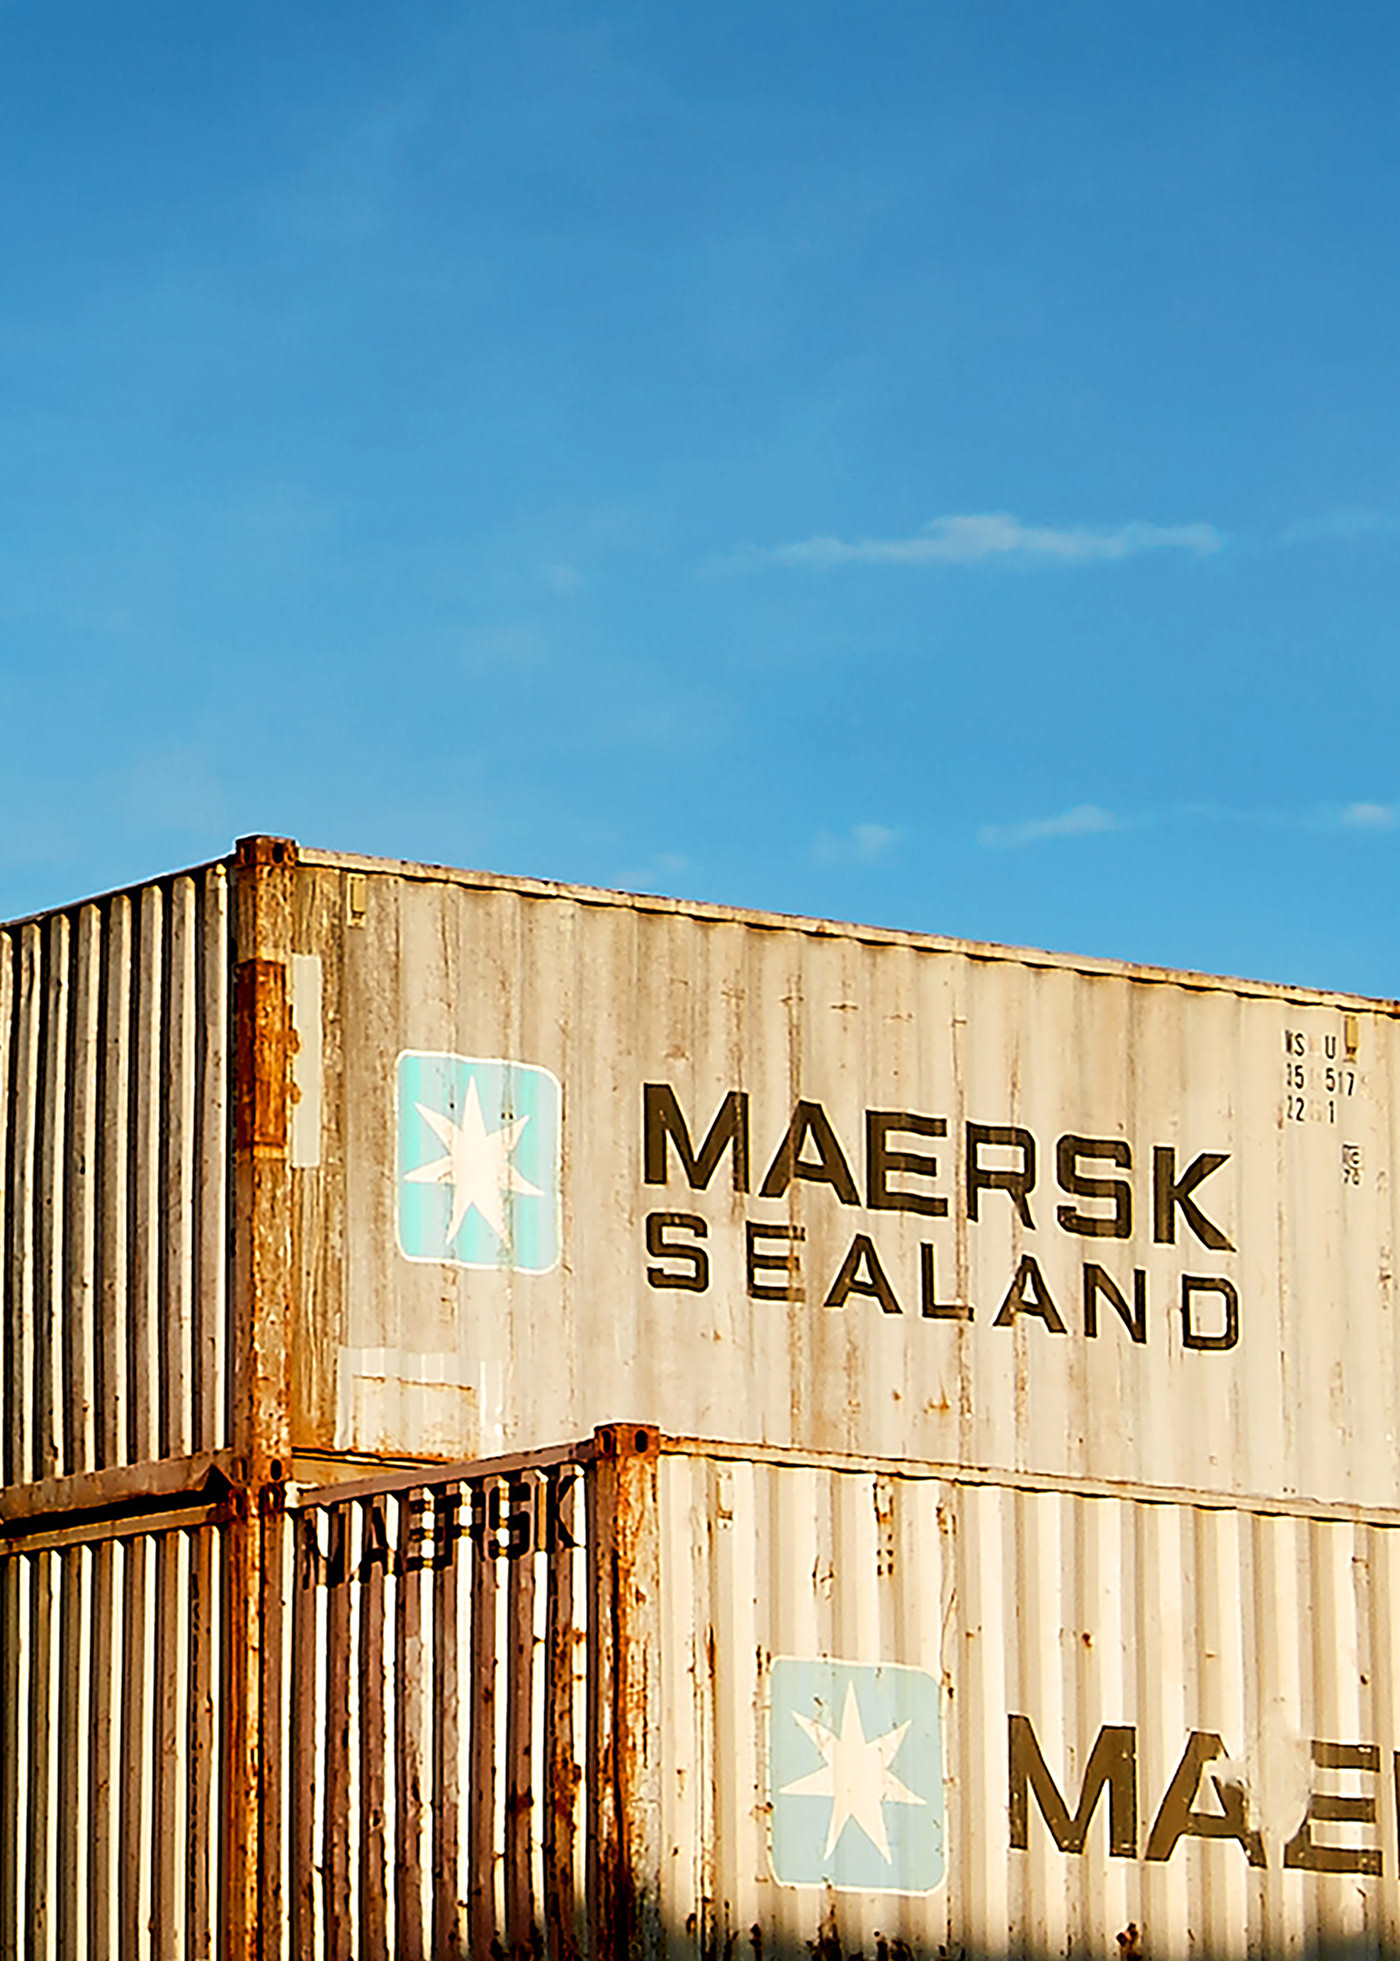 sea land containers Conteneurs mer terre colorfull Mearsk fine art Photography 